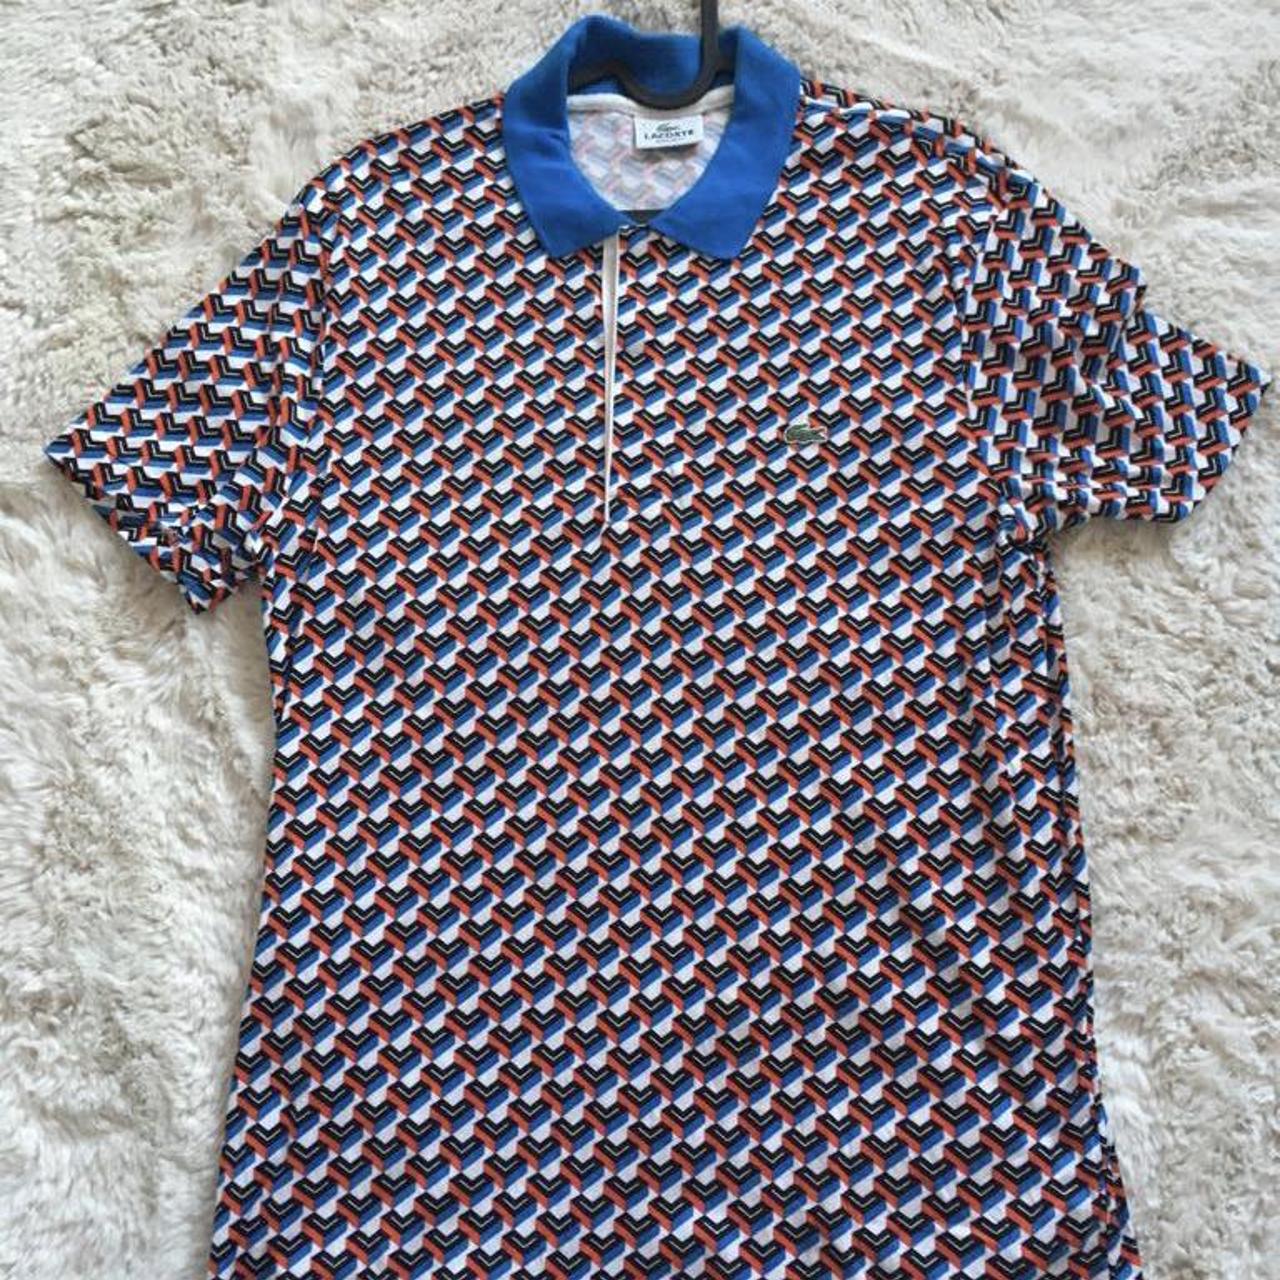 Lacoste polo shirt - size medium in great condition - Depop